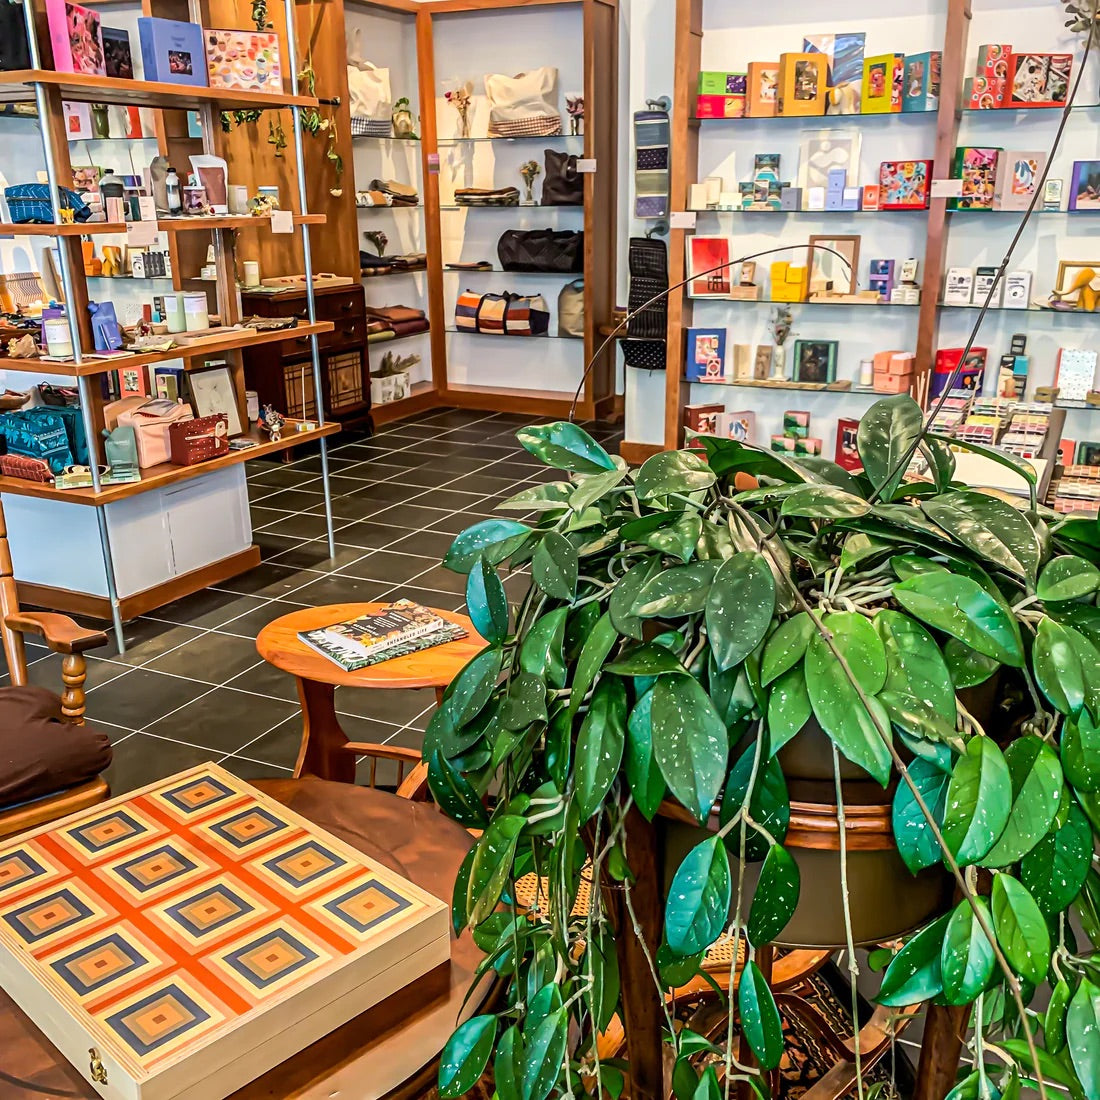 Interior of Green & Bean gift shop in Annapolis Maryland. Features their large hoya plant, a tabletop backgammon board in Squaresville peach and surrounding shelves with colorful products